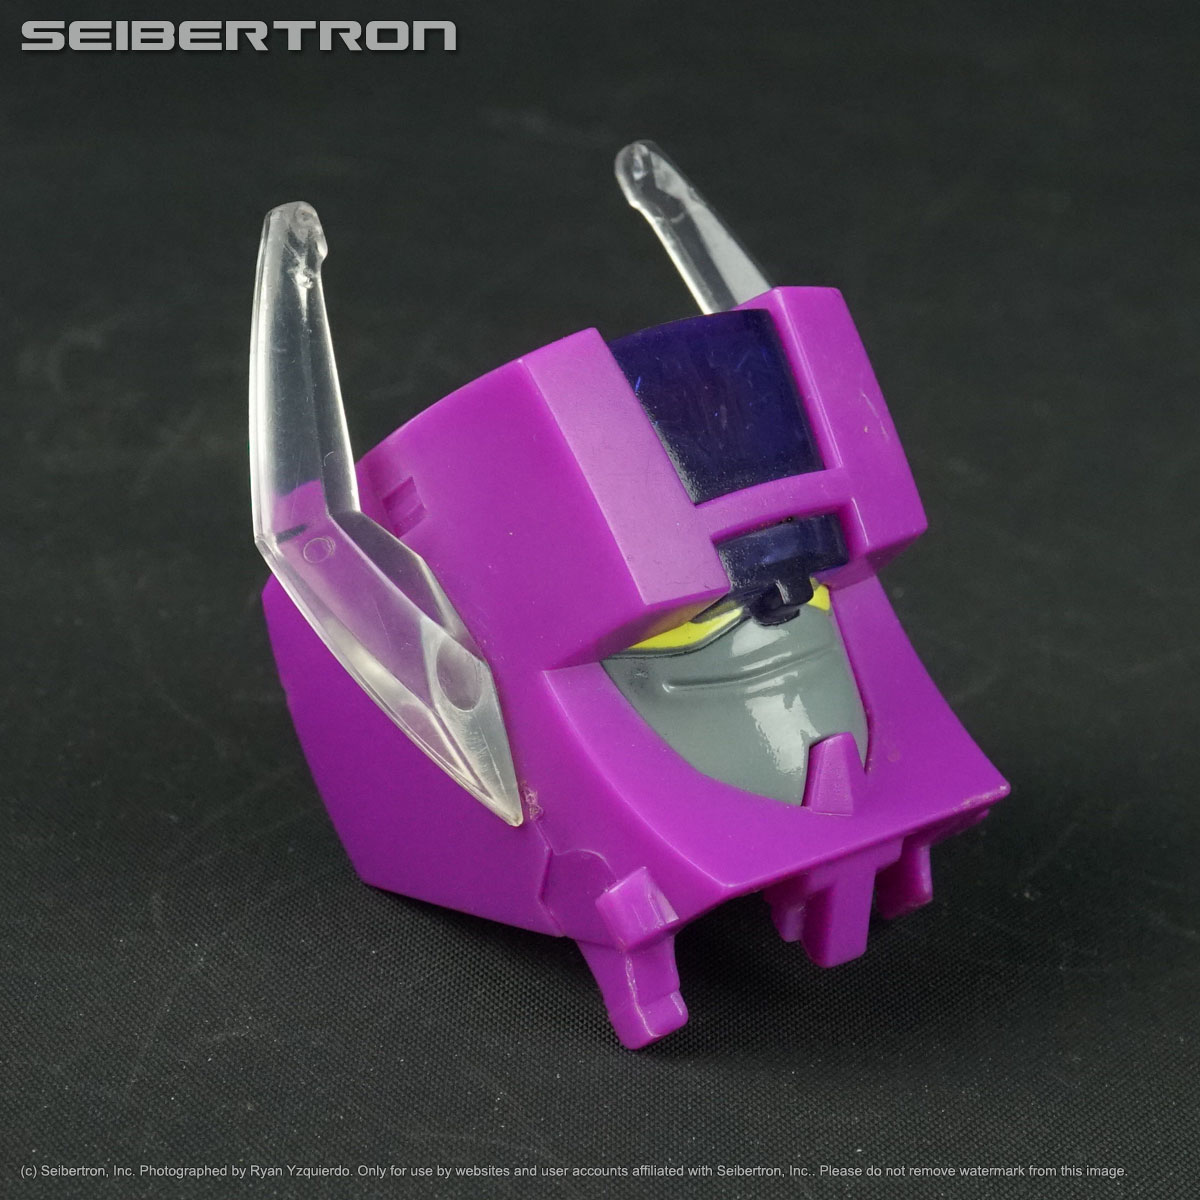 Transformers, Masters of the Universe, Teenage Mutant Ninja Turtles, Gobots, Comic Books, Shopkins, and other listings from Seibertron.com: HEADMASTER accessory Transformers Animated Bulkhead Leader Class 2008 Hasbro